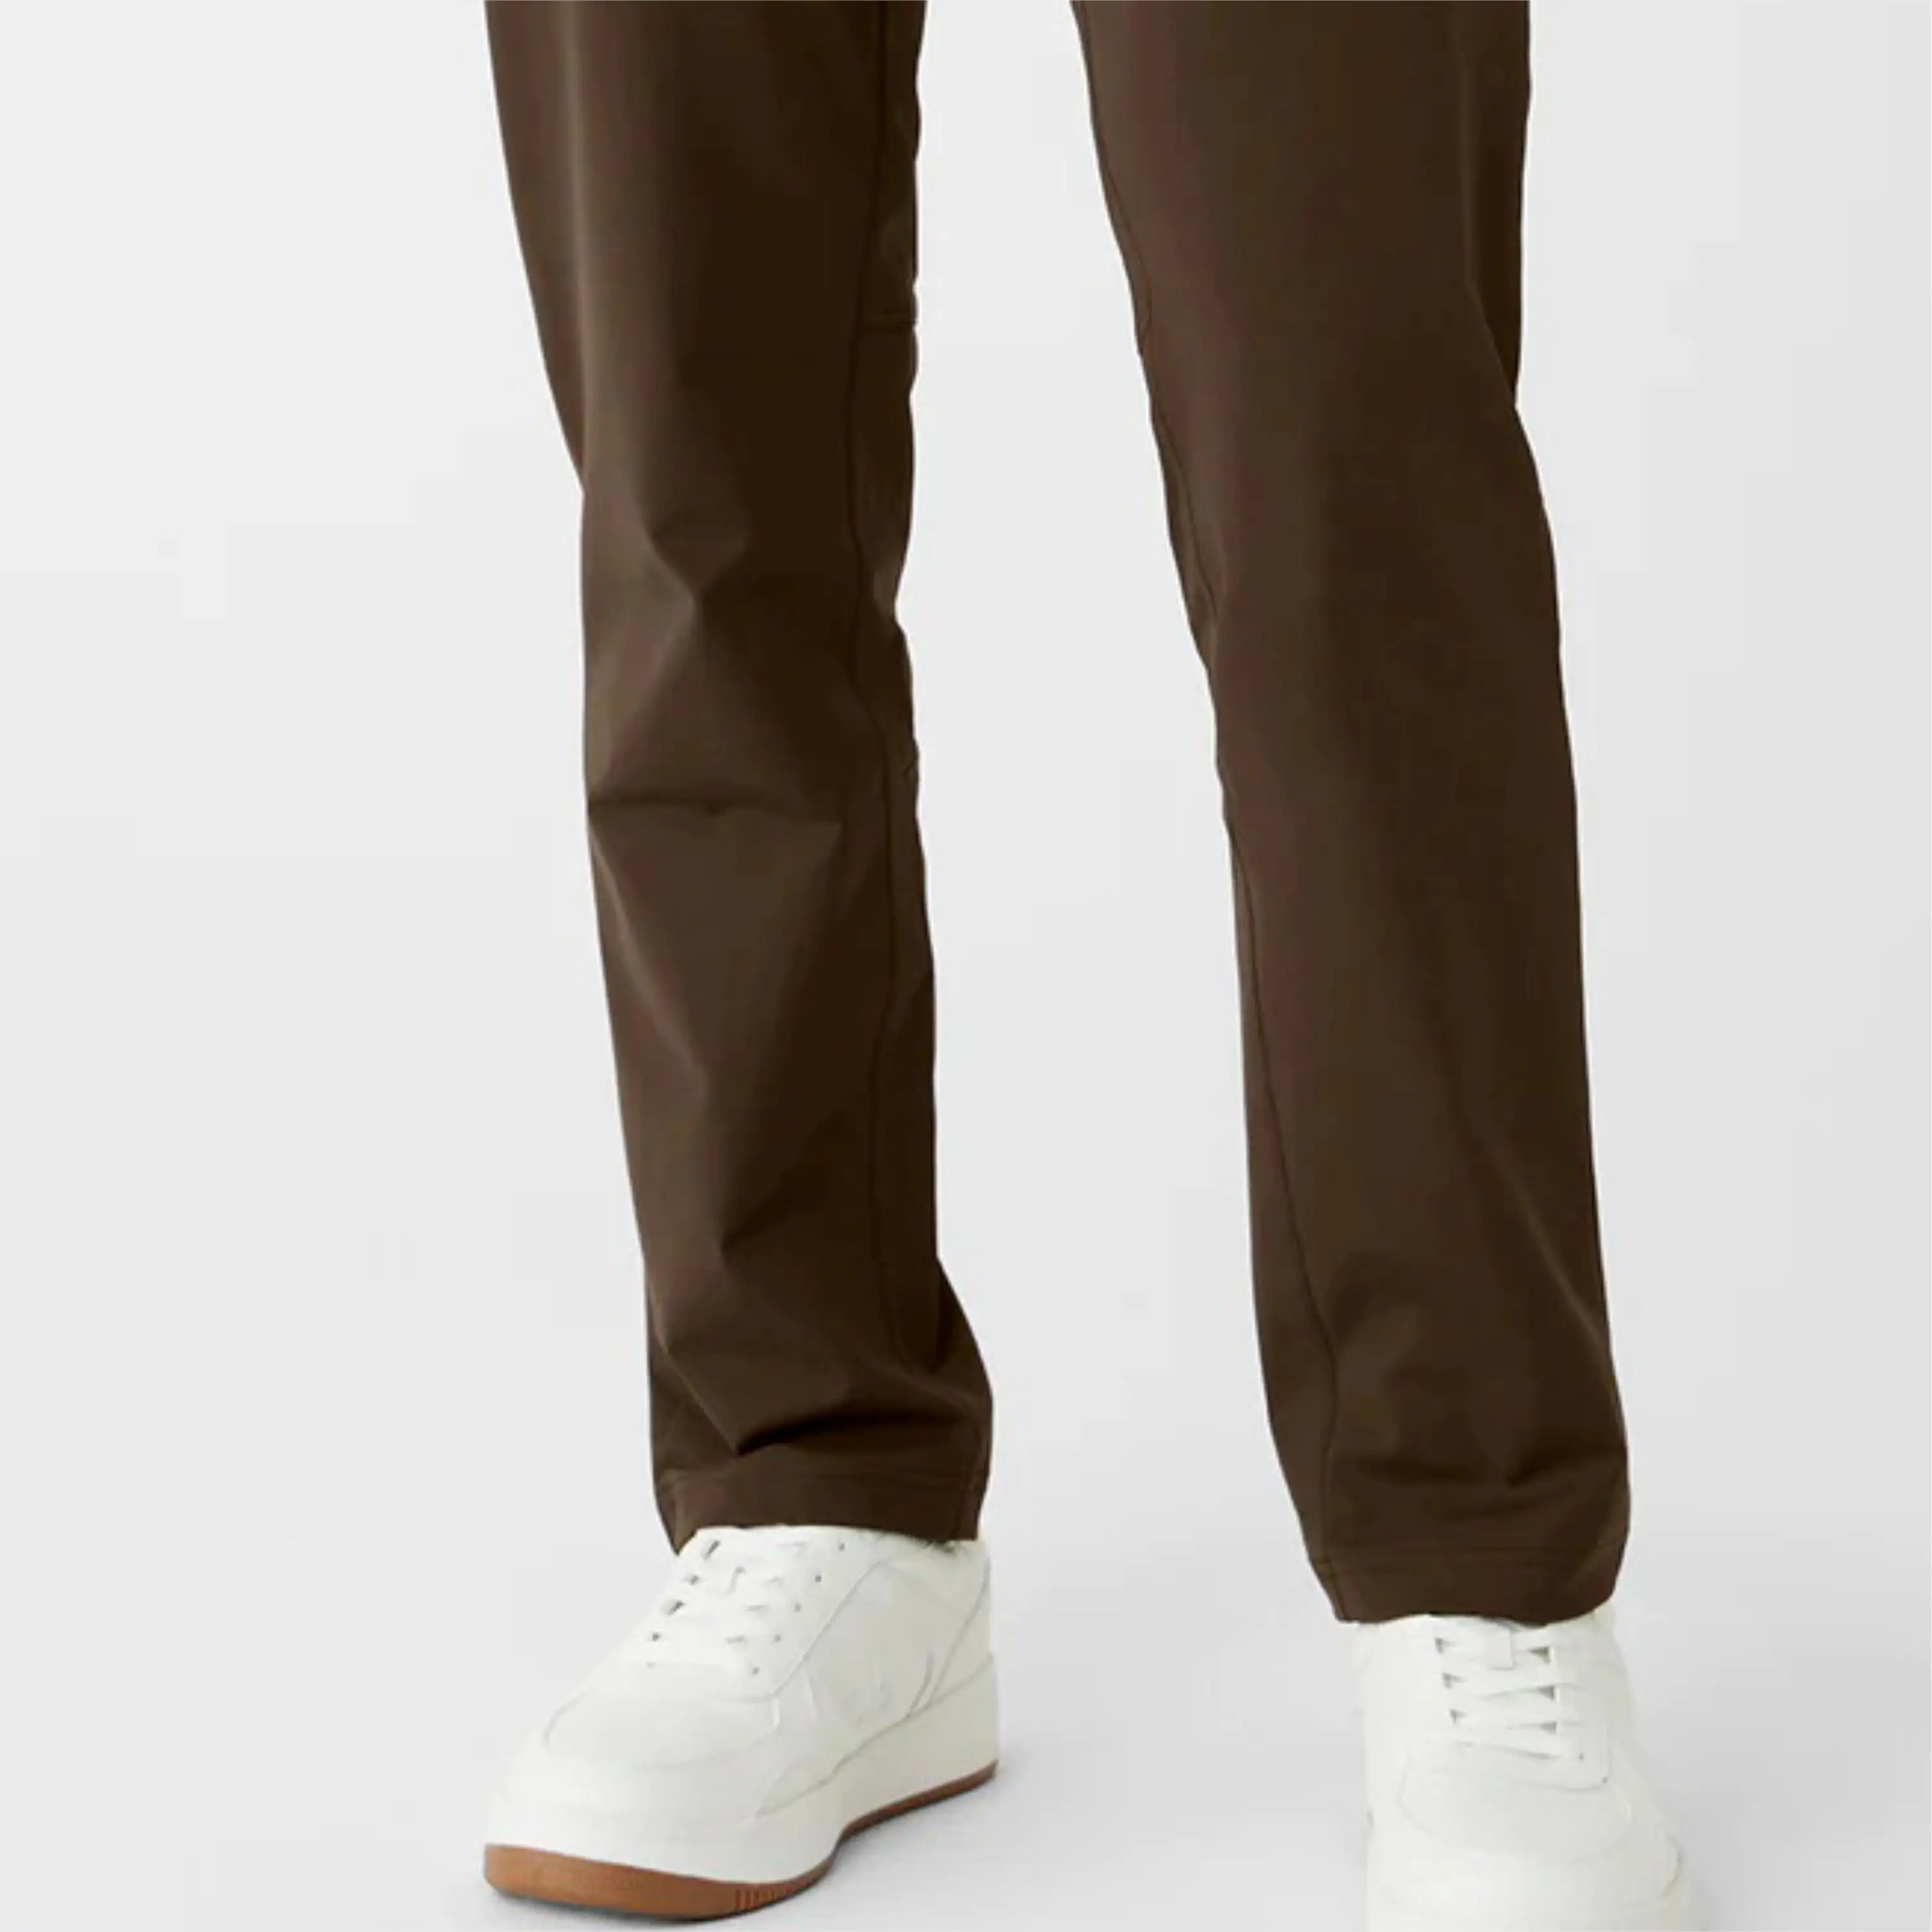 Gentleman Essential Dress Pants - Classic Button Closure, Flat-Front Style, Perfect For Formal Events